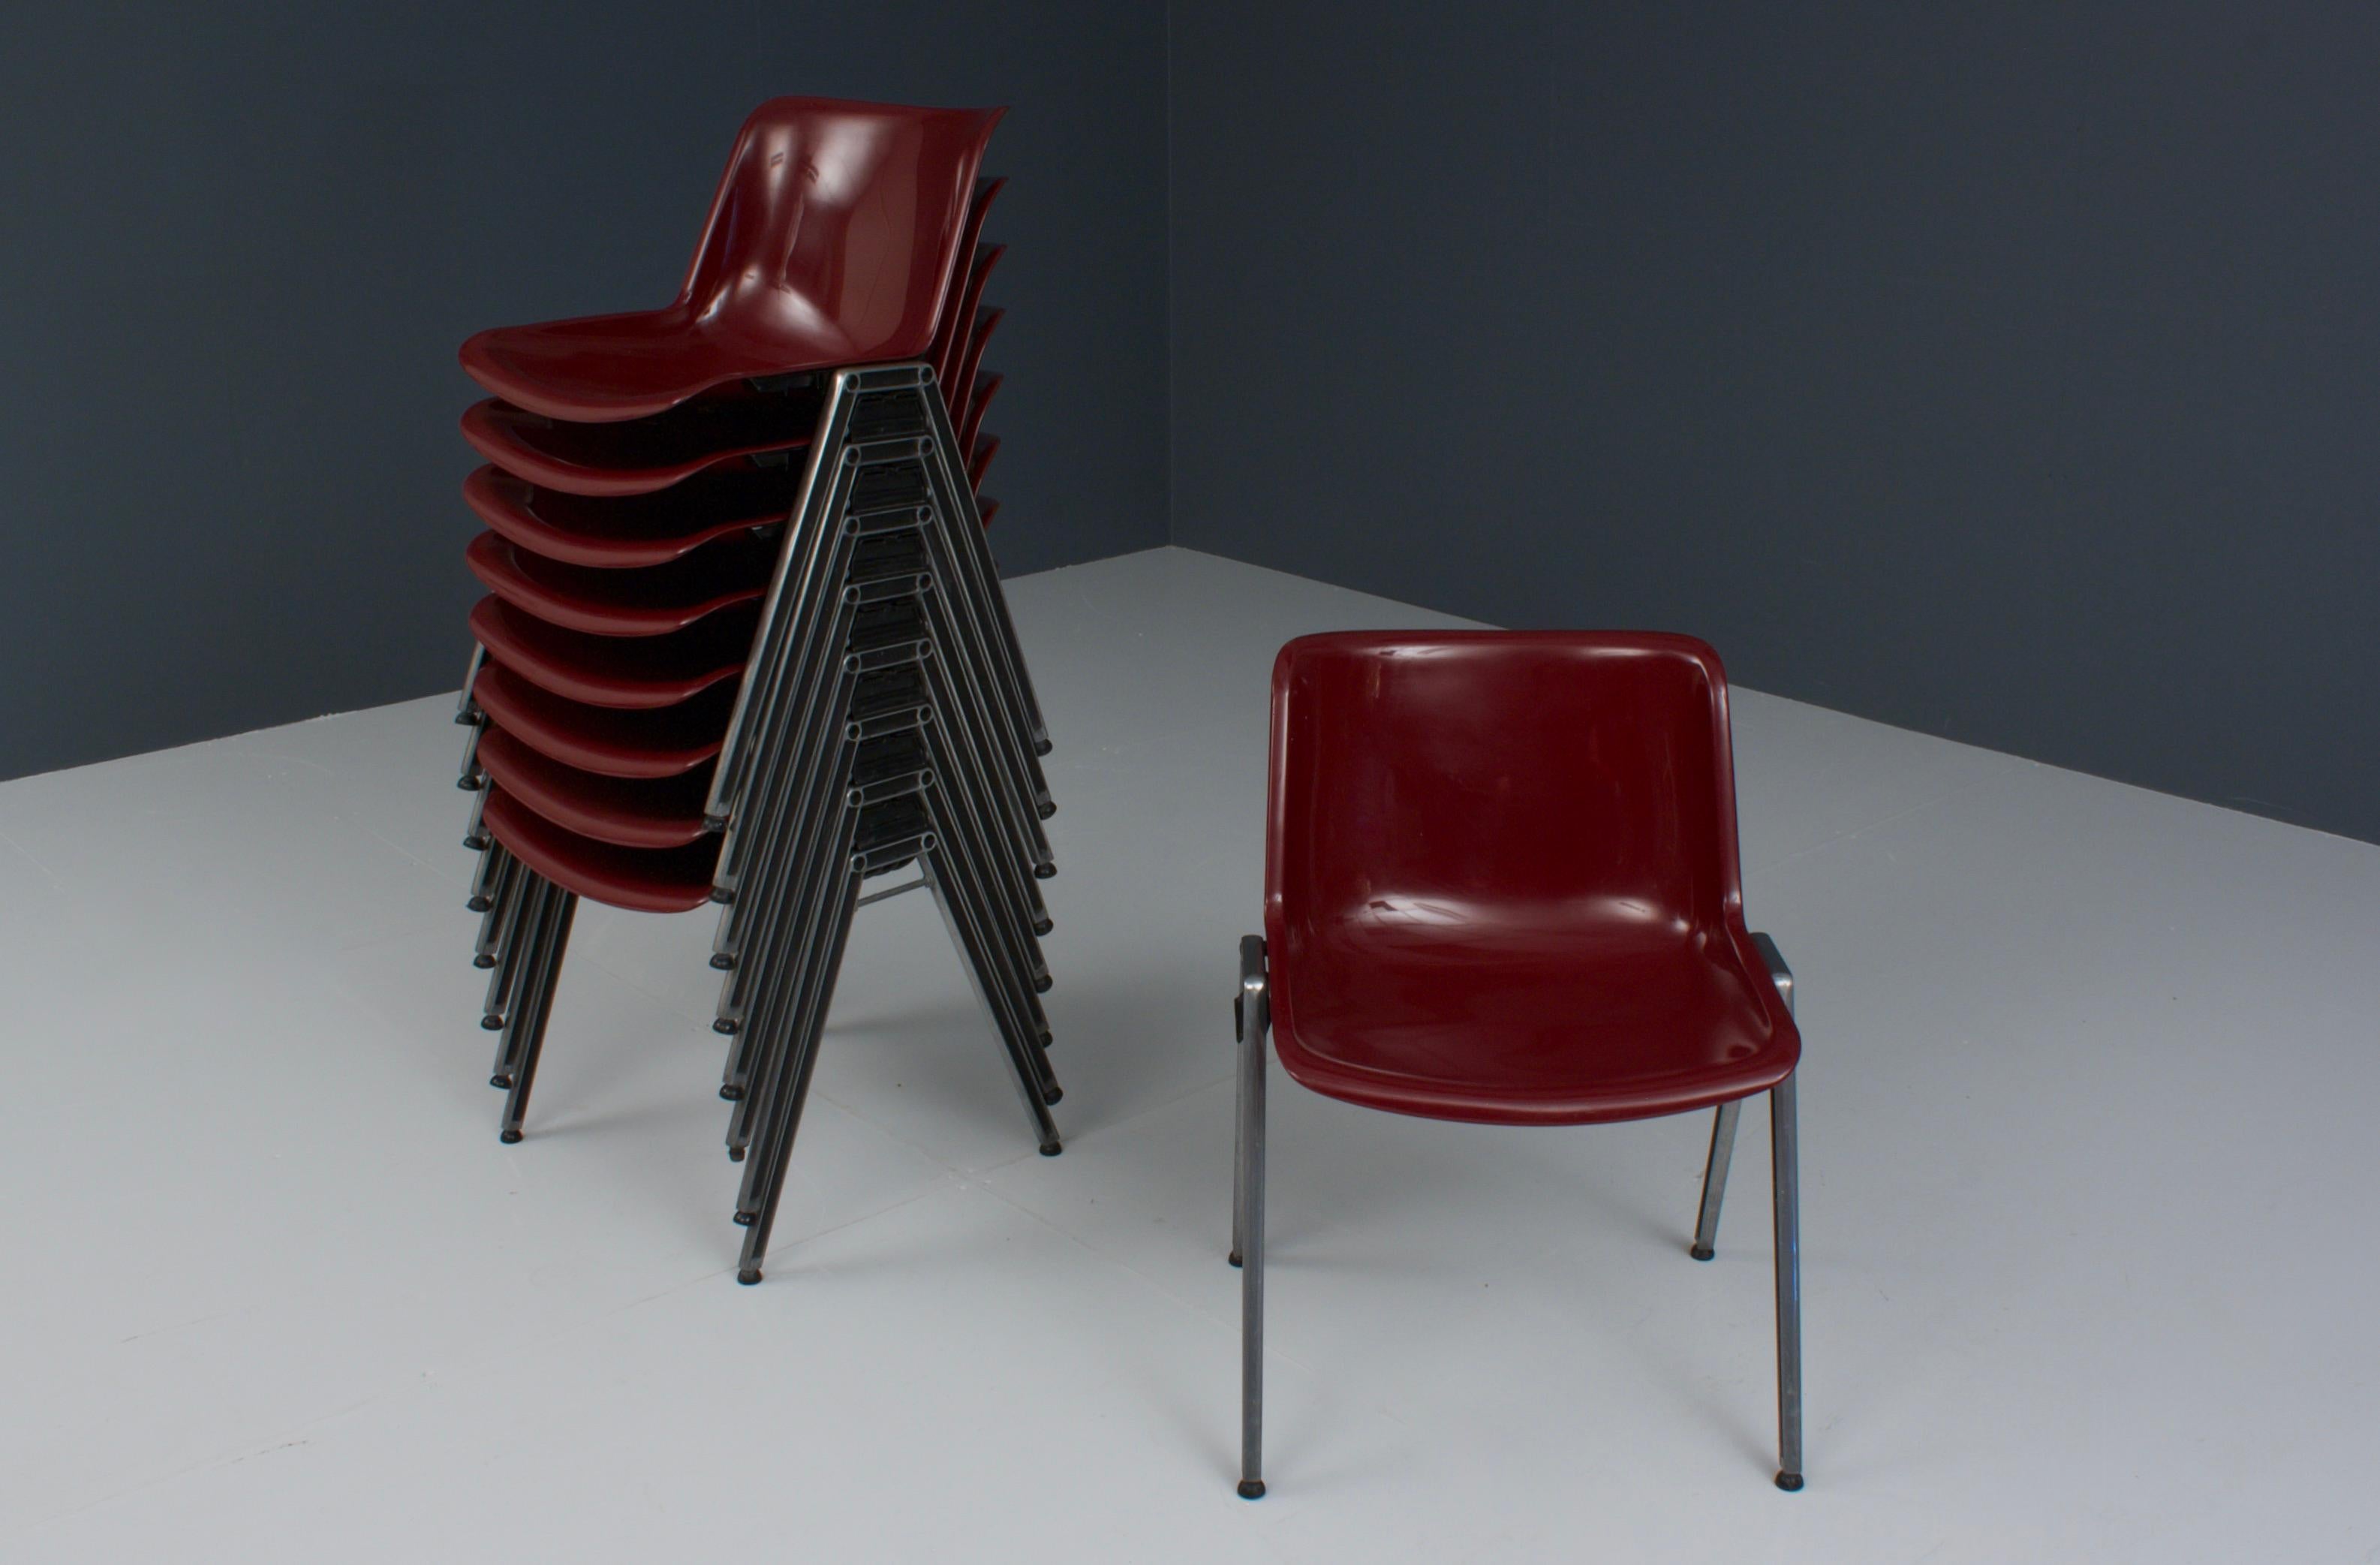 Set of nine wonderful stacking chairs by Osvaldo Borsani for Tecno, Italy. The chairs haven't been produced much in this color, it is a beautiful shiny Bordeaux red quite rare and distinct. The chairs have the usual Borsani metal frame with ABS